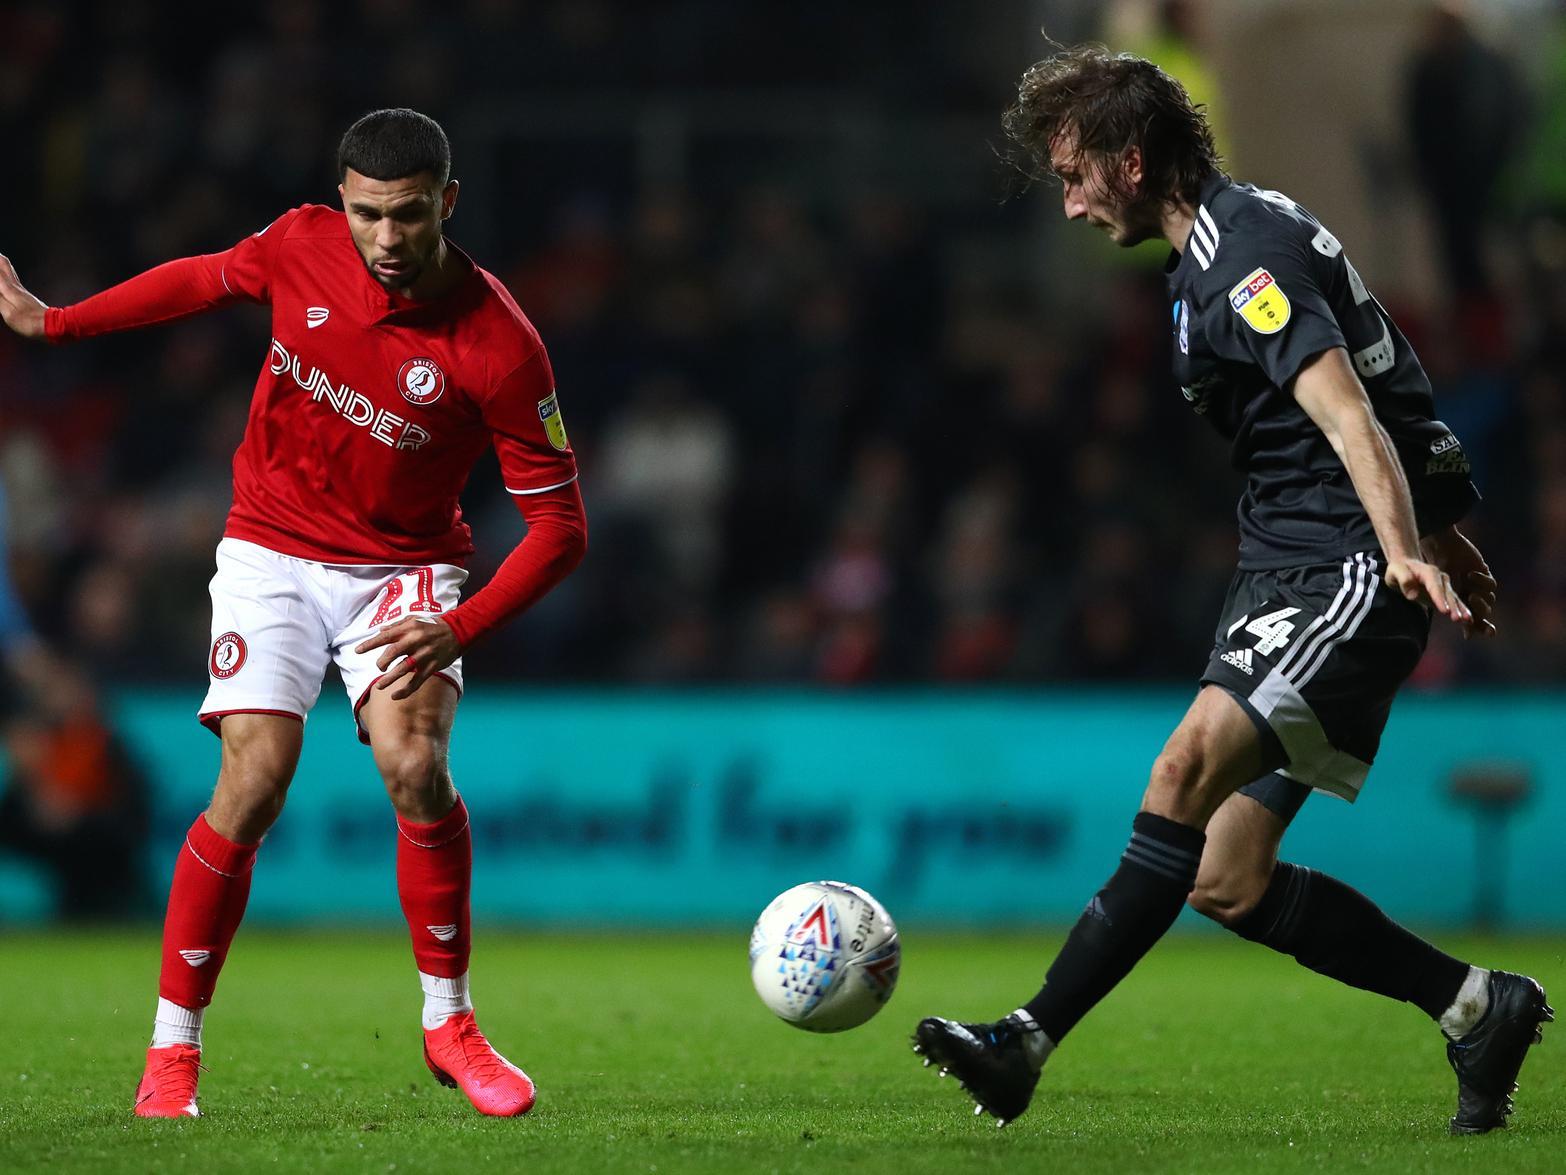 Ex-Leeds midfielder David Prutton has questioned the club's decision to loan Jean-Kevin Augustin, when they could have beaten Bristol City to 5m striker Nahki Wells in January. (Yorkshire Evening Post)